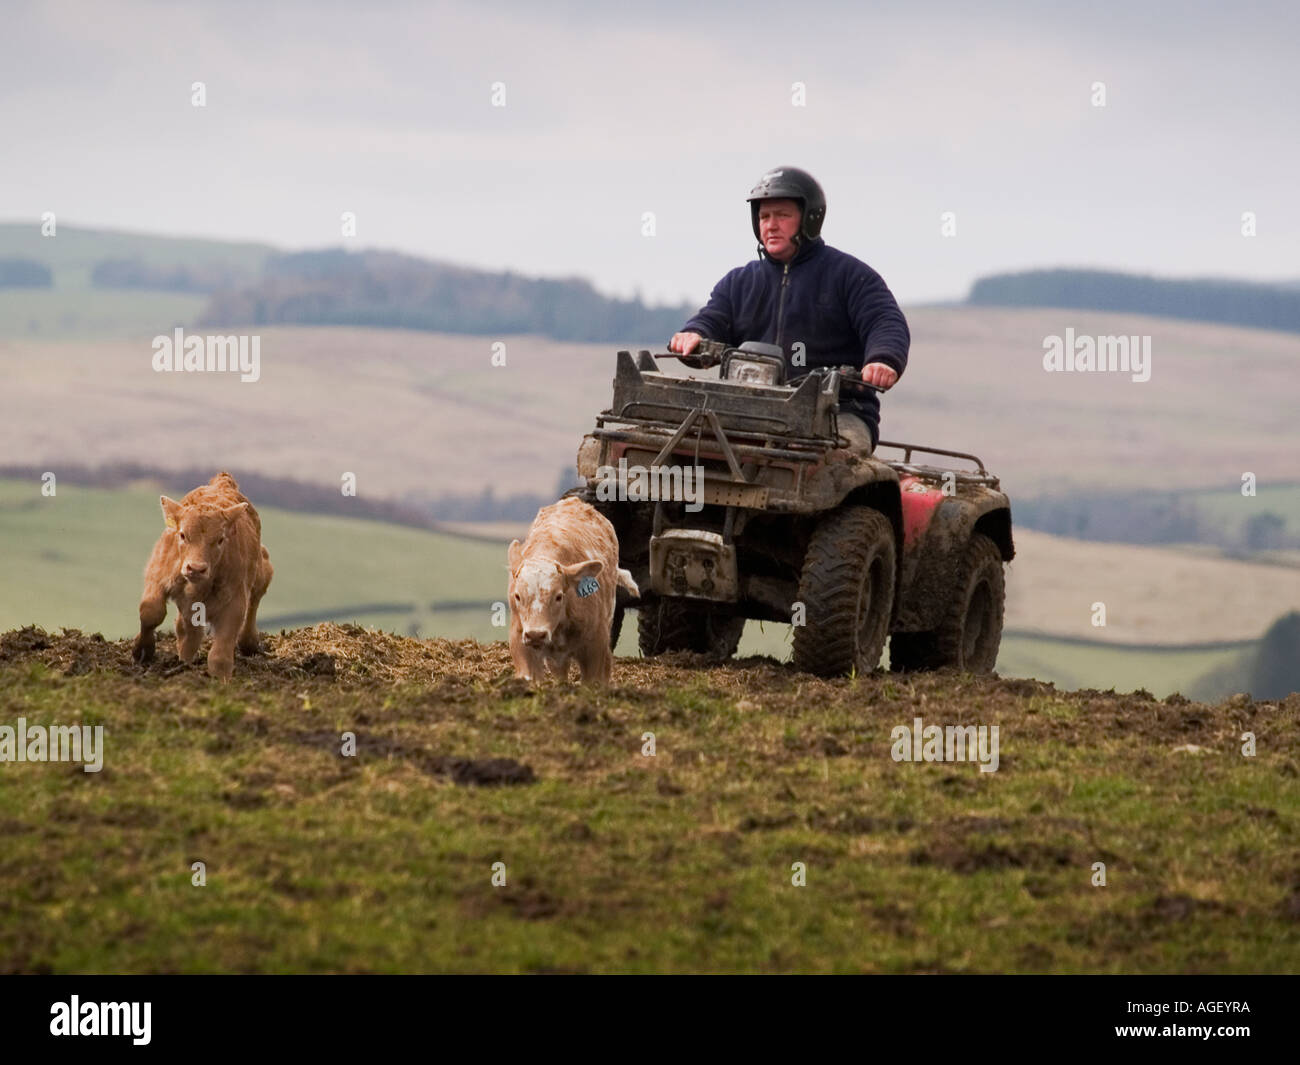 Farmer uses a quadbike to round up his herd of cattle. Stock Photo